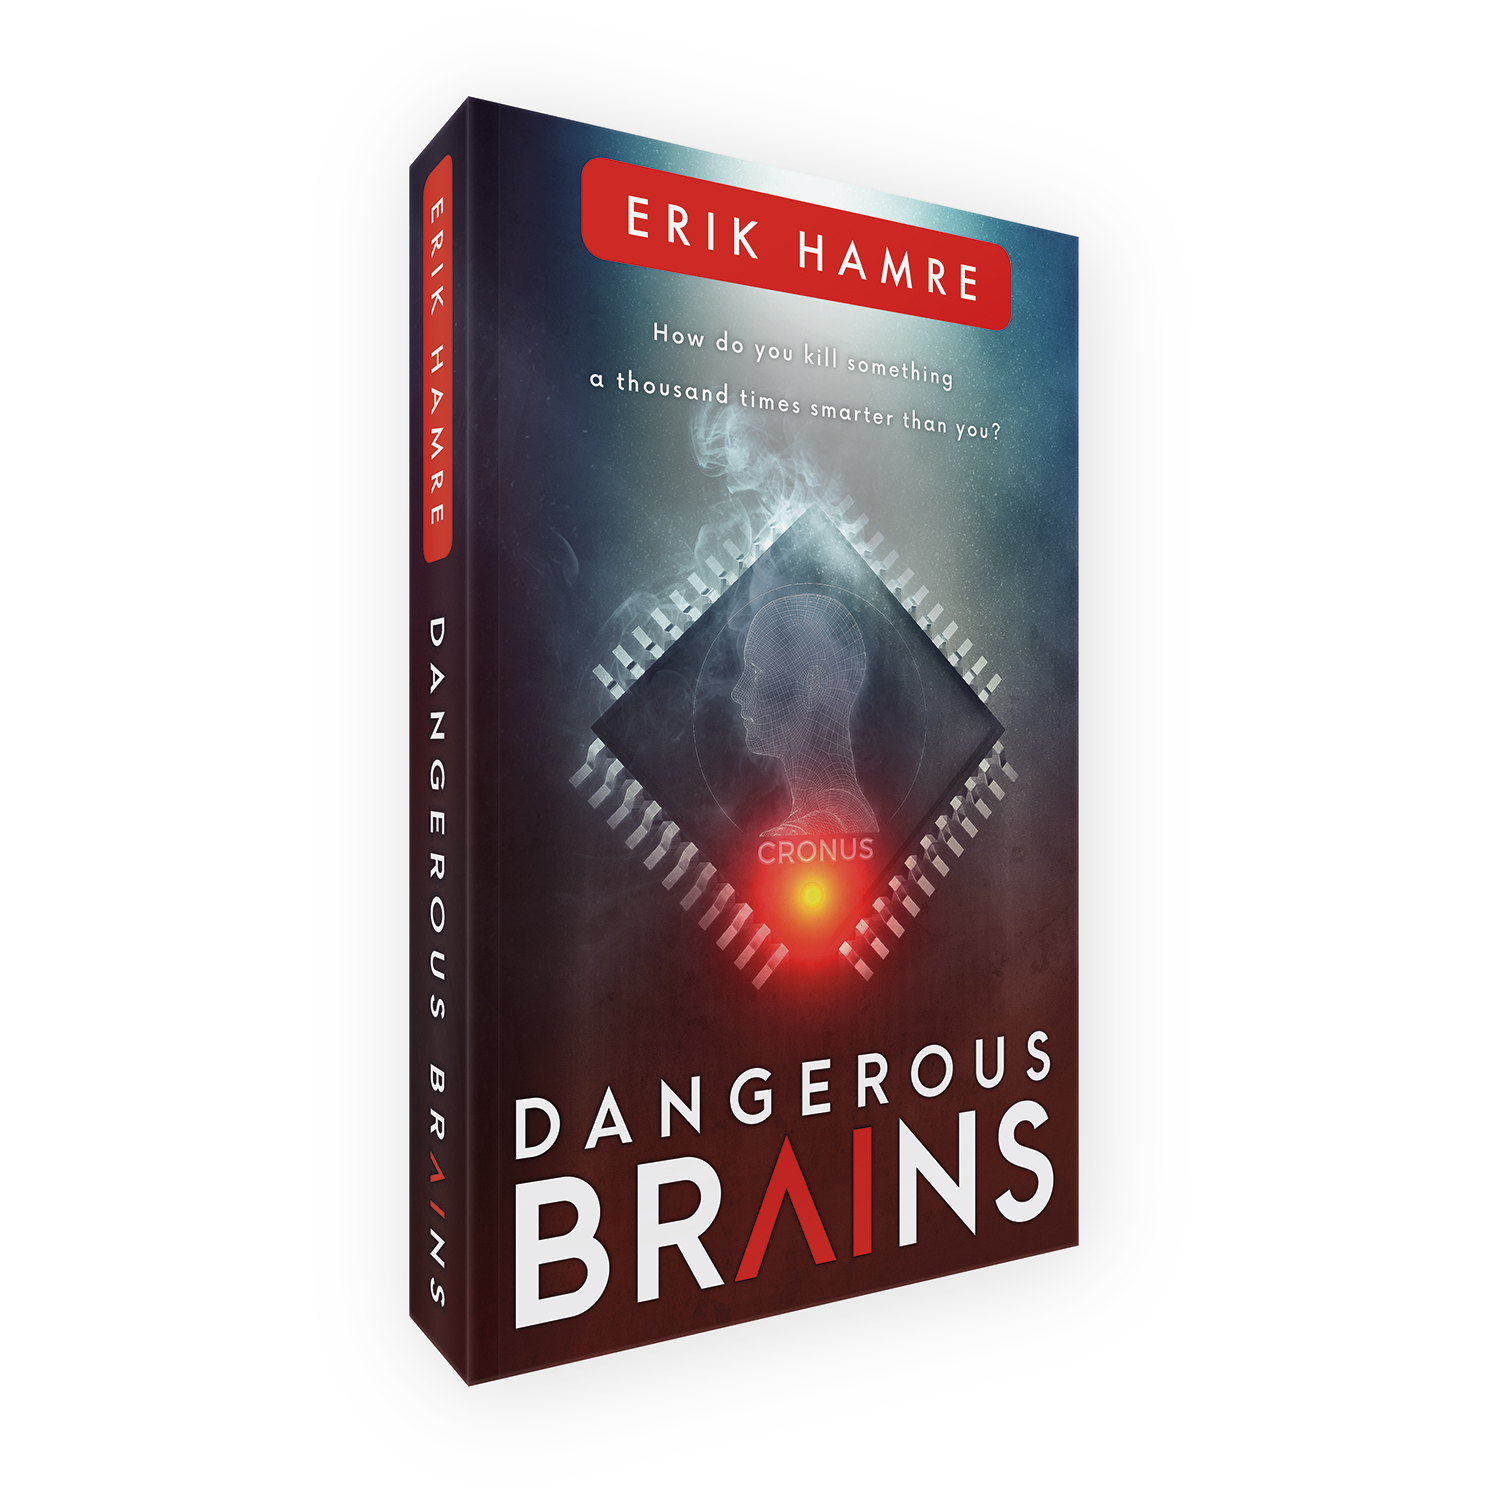 'Dangerous Brains' is a stylish military scifi cyber thriller, by Erik Hamre. The book cover was designed by Mark Thomas, of coverness.com. To find out more about my book design services, please visit www.coverness.com.